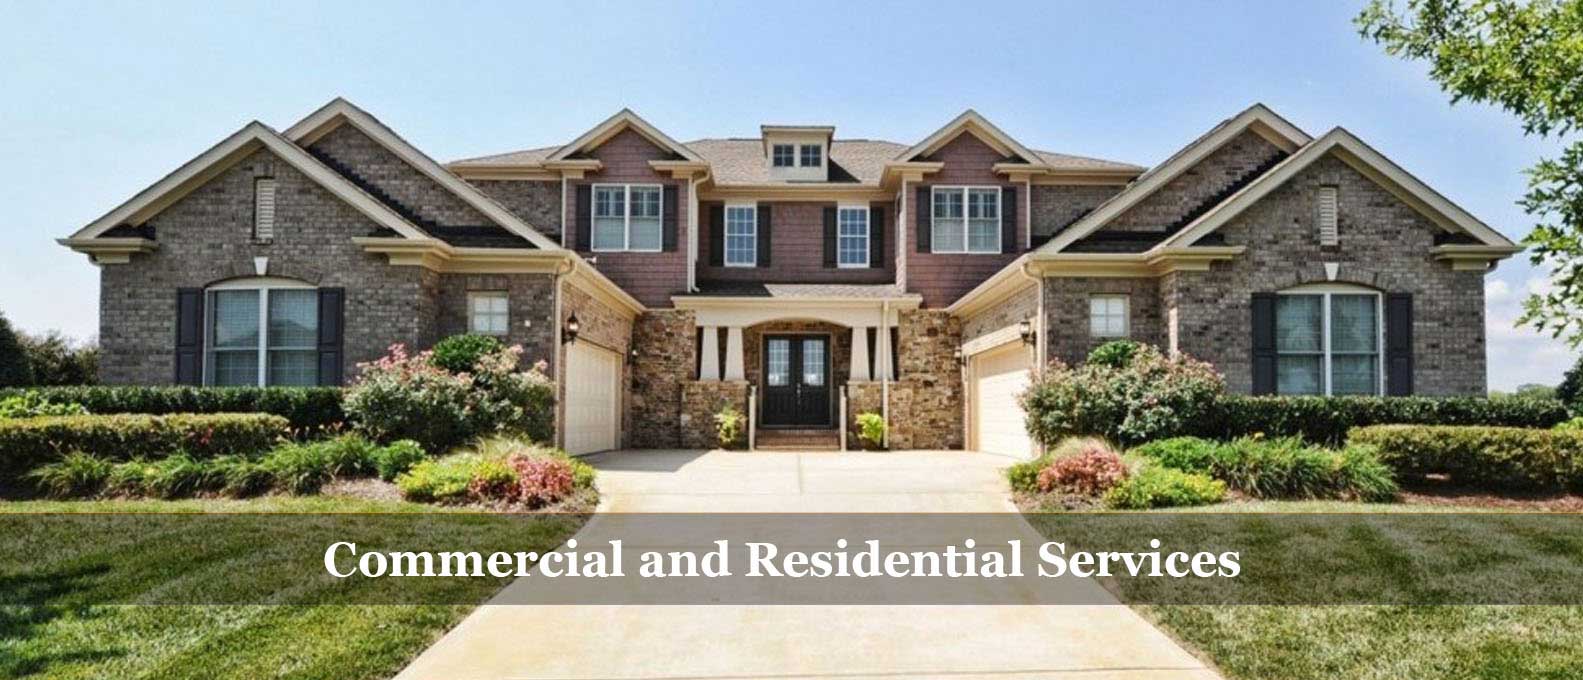 commercial-residential-services